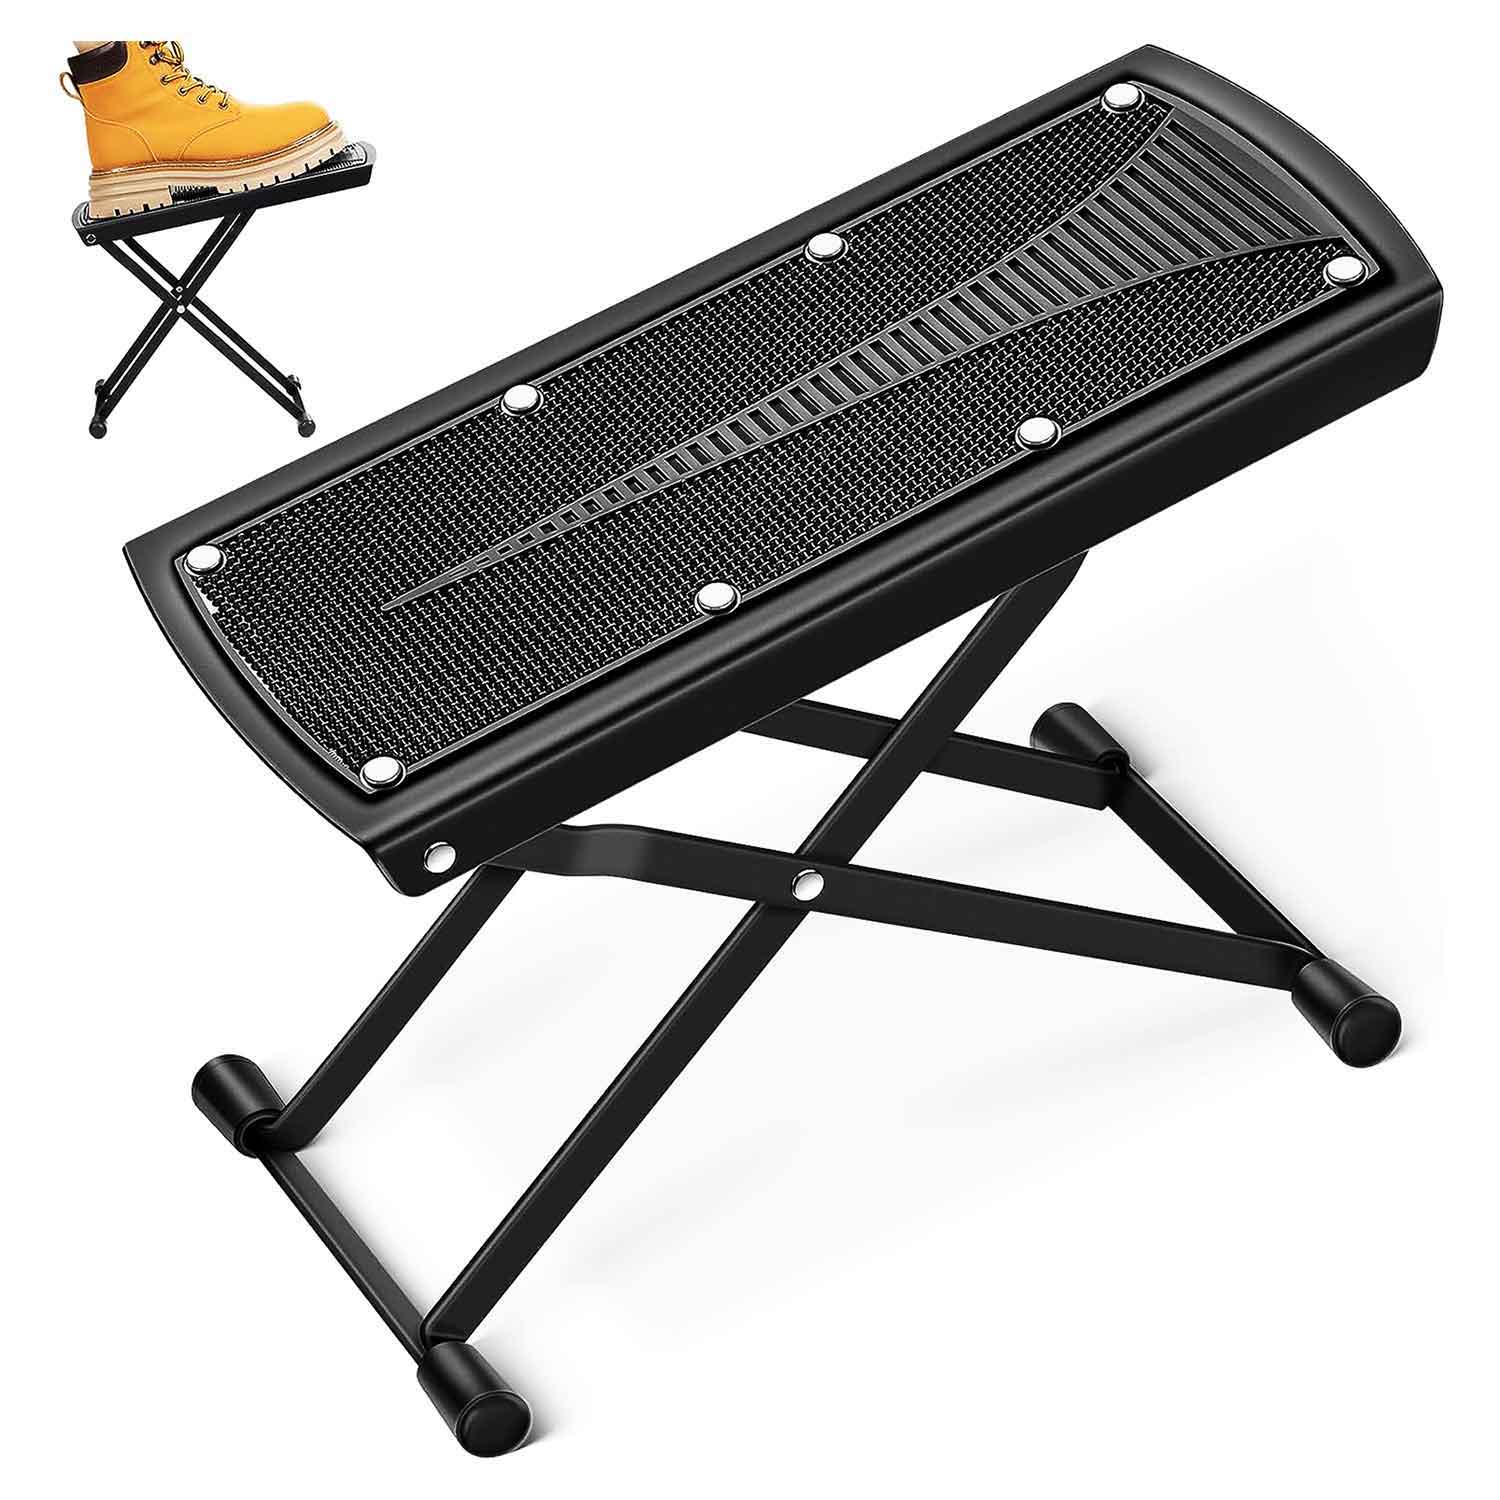 5 Core Guitar Foot Stool Stand • 6 Level Height Adjustable Leg Rest • Rubber Pad Stable Foot Stand